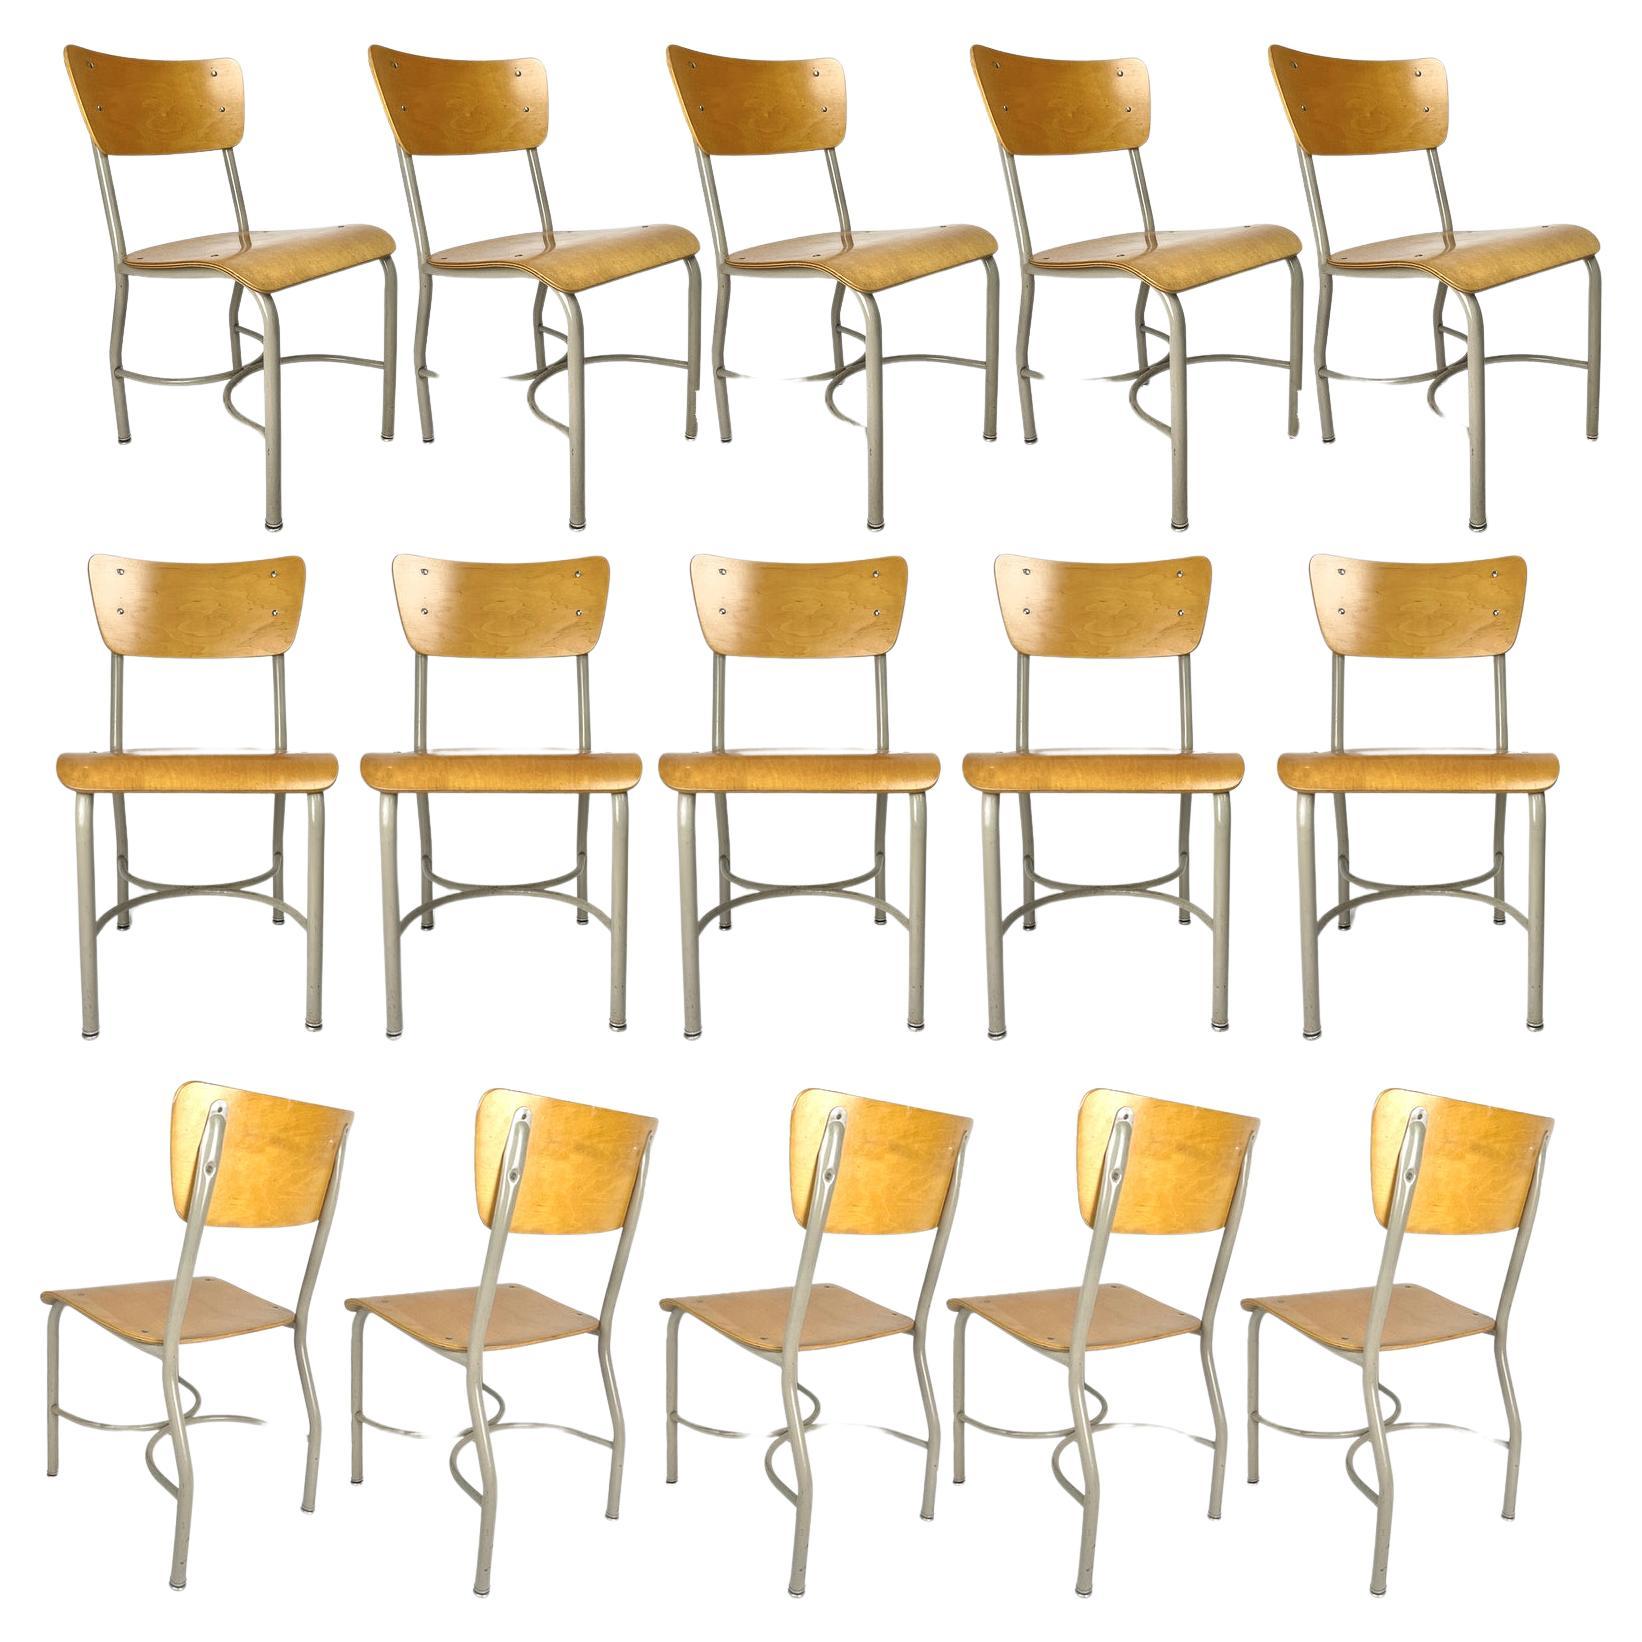 Midcentury French Style Grey & Birch Plywood School or Cafe Chairs -35 Available For Sale